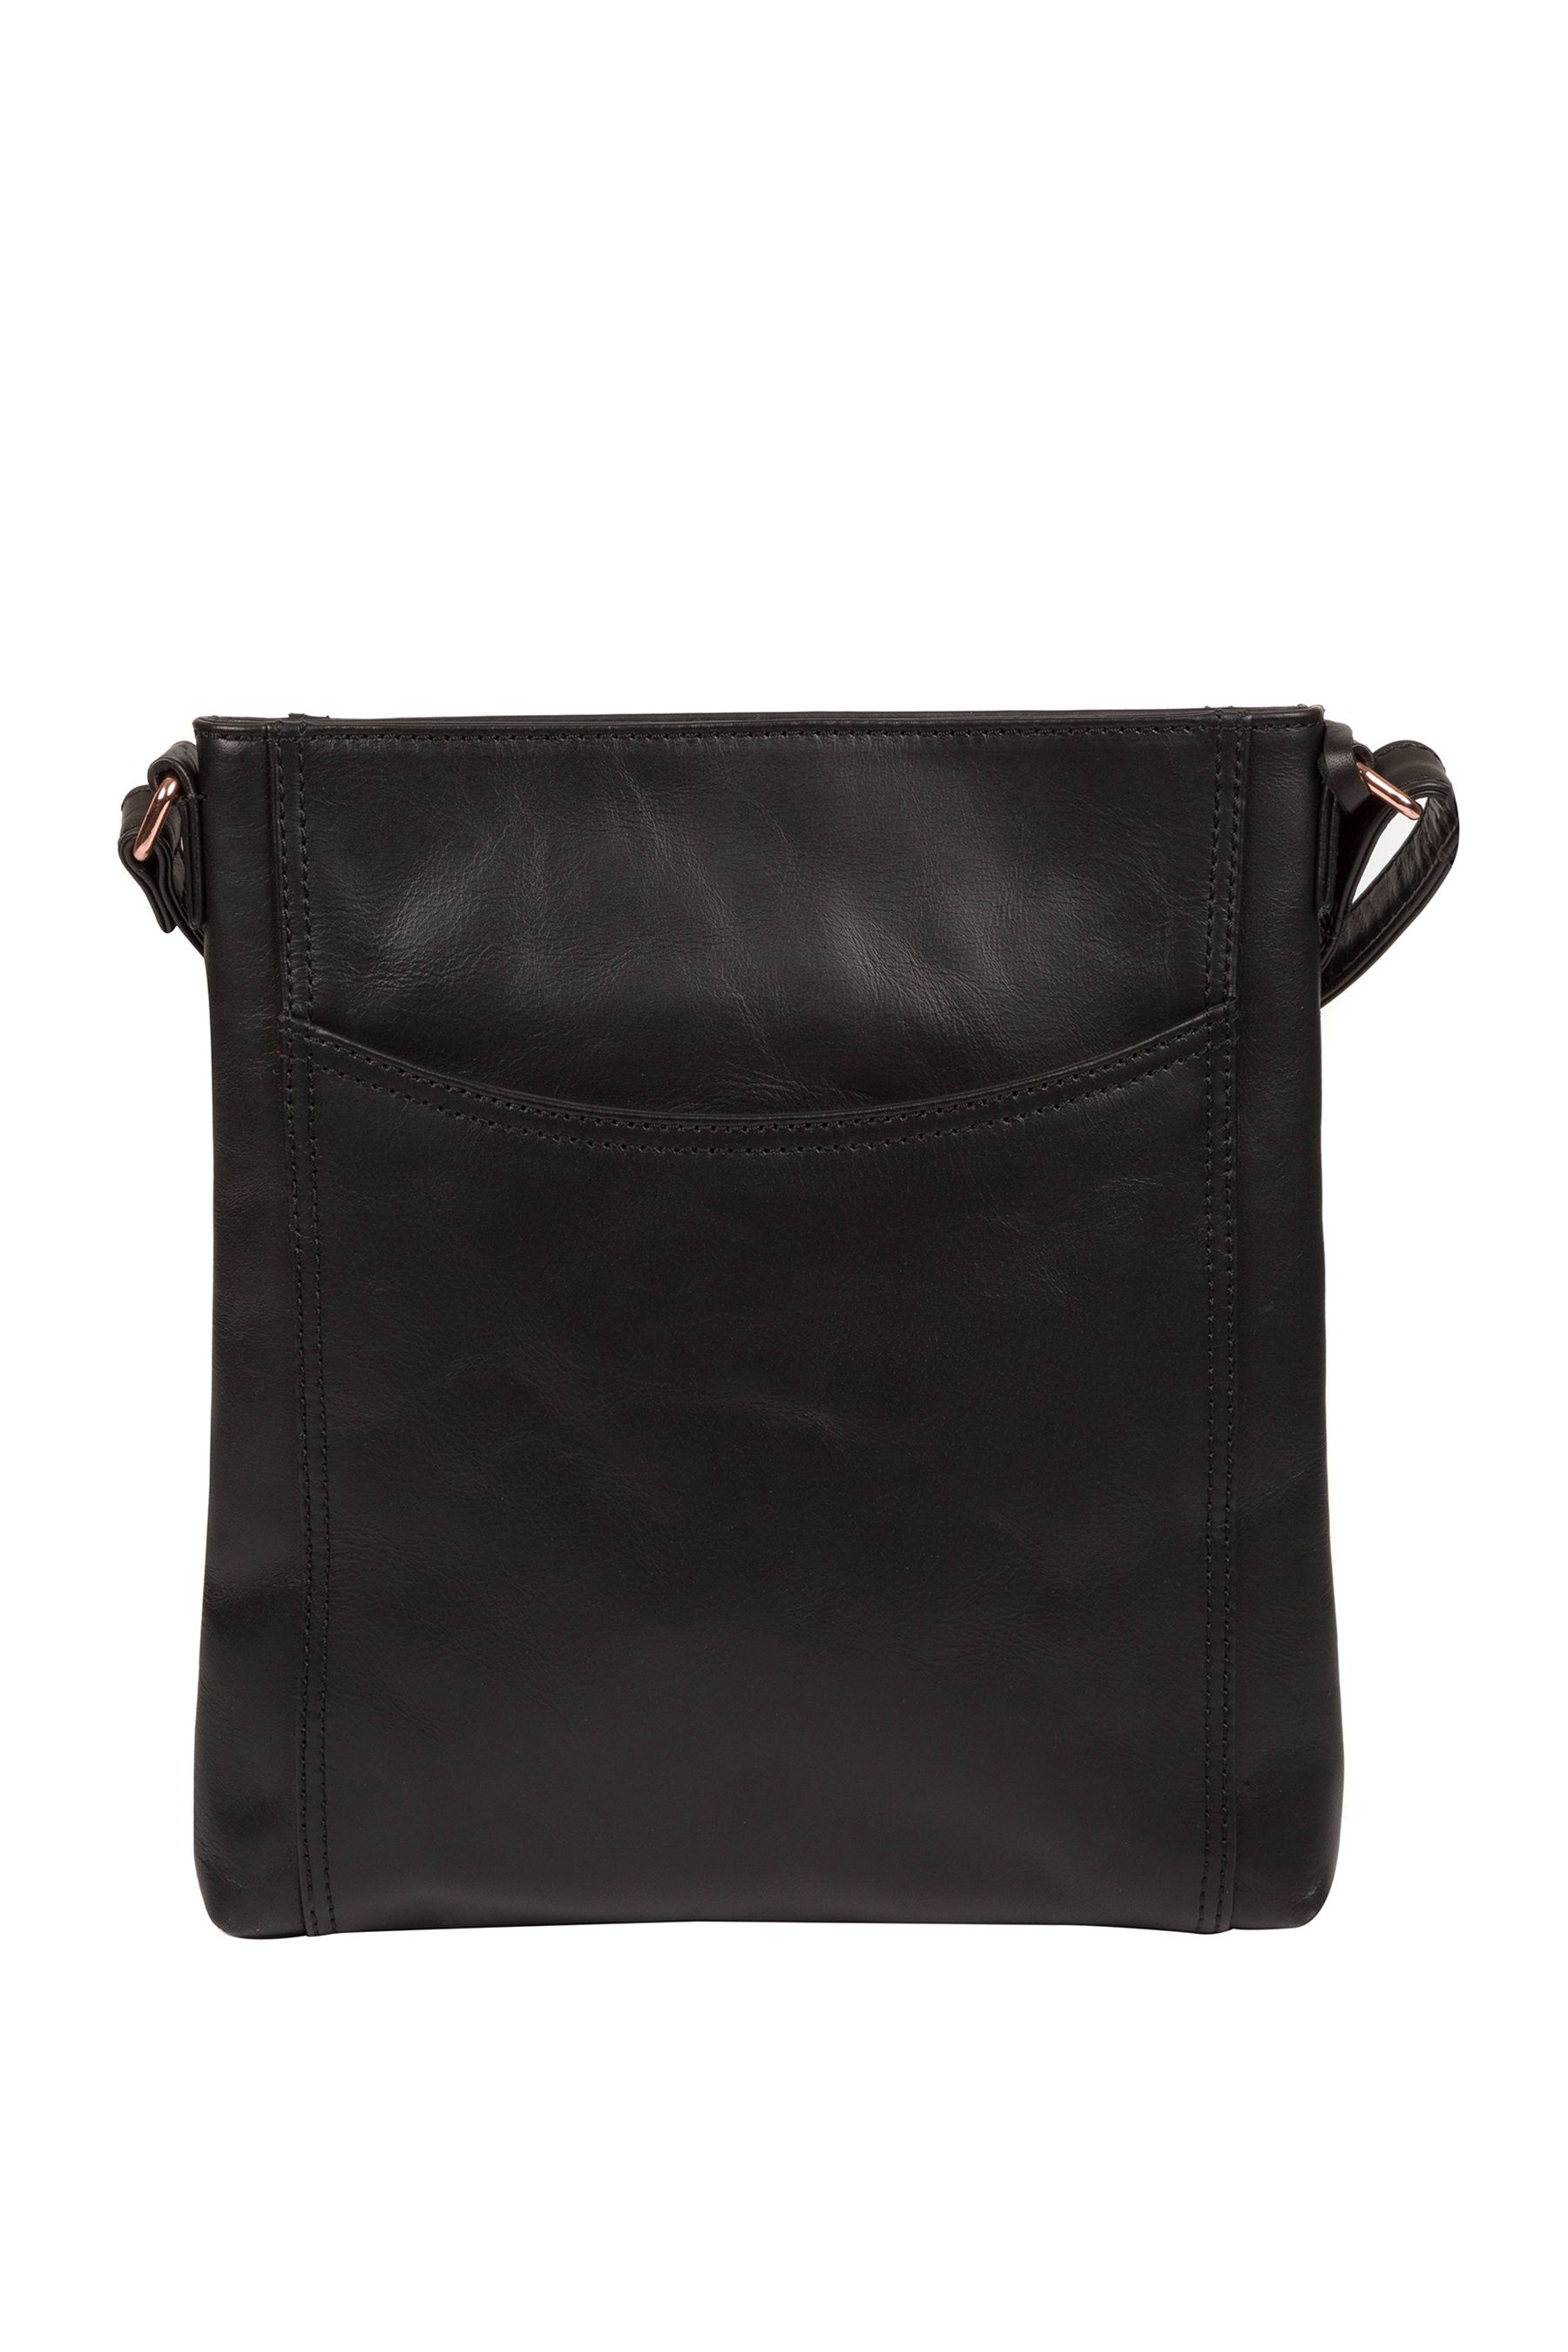 Pure Luxuries London Gilpin Leather Cross-Body Bag